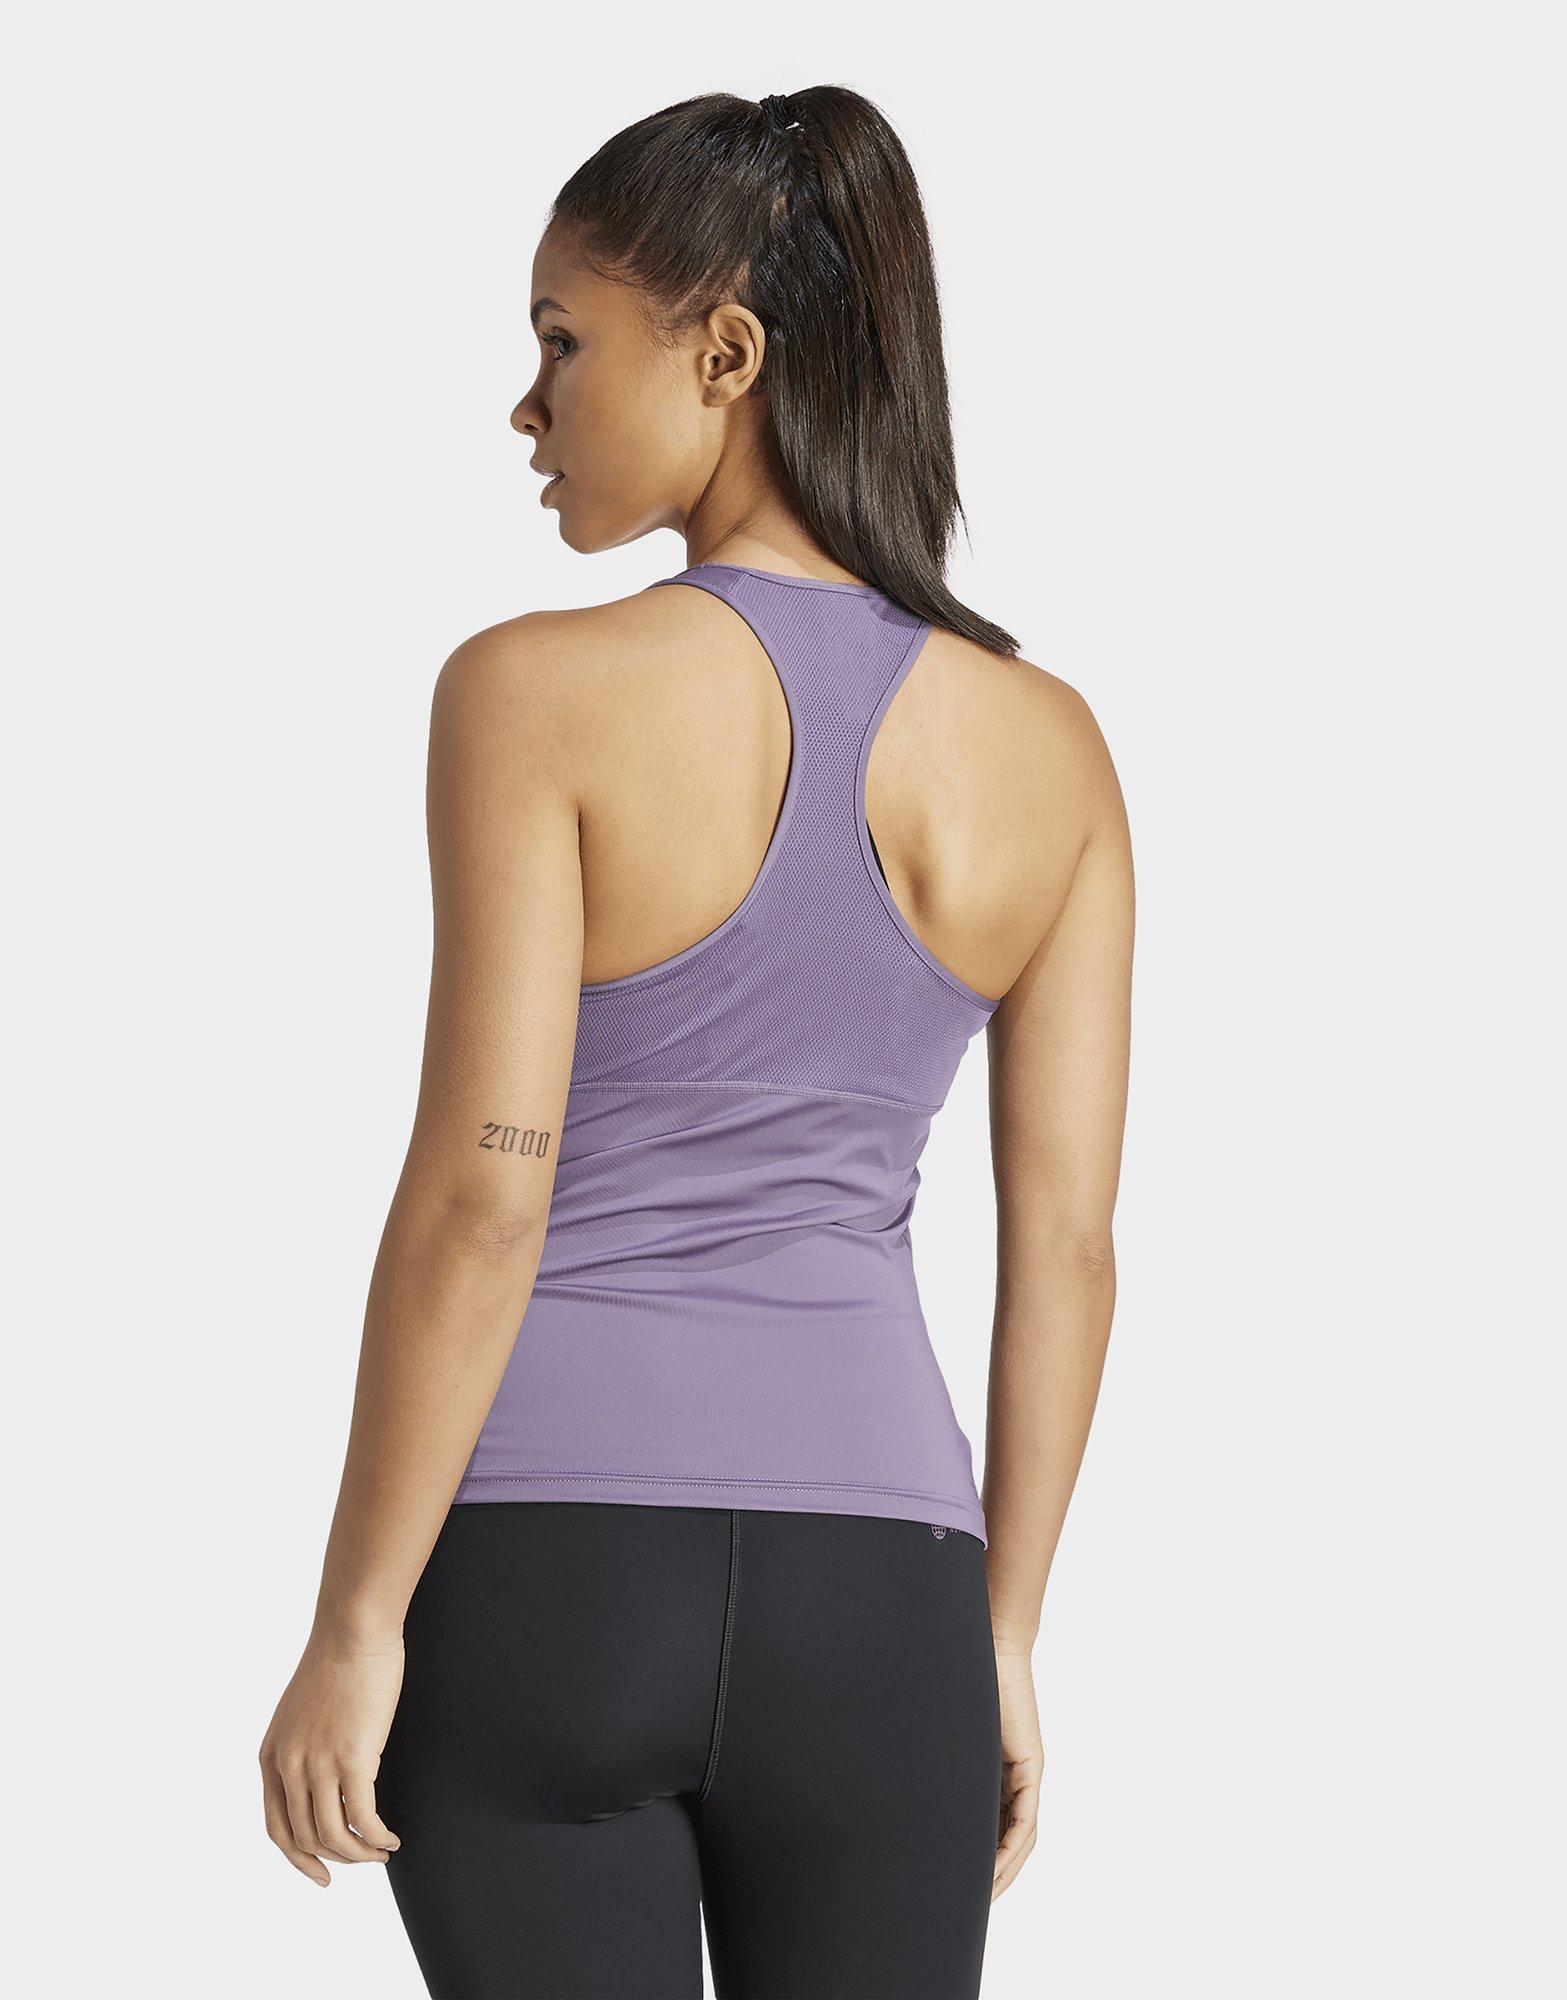 Stay supported and stylish with the Adidas Techfit Racerback